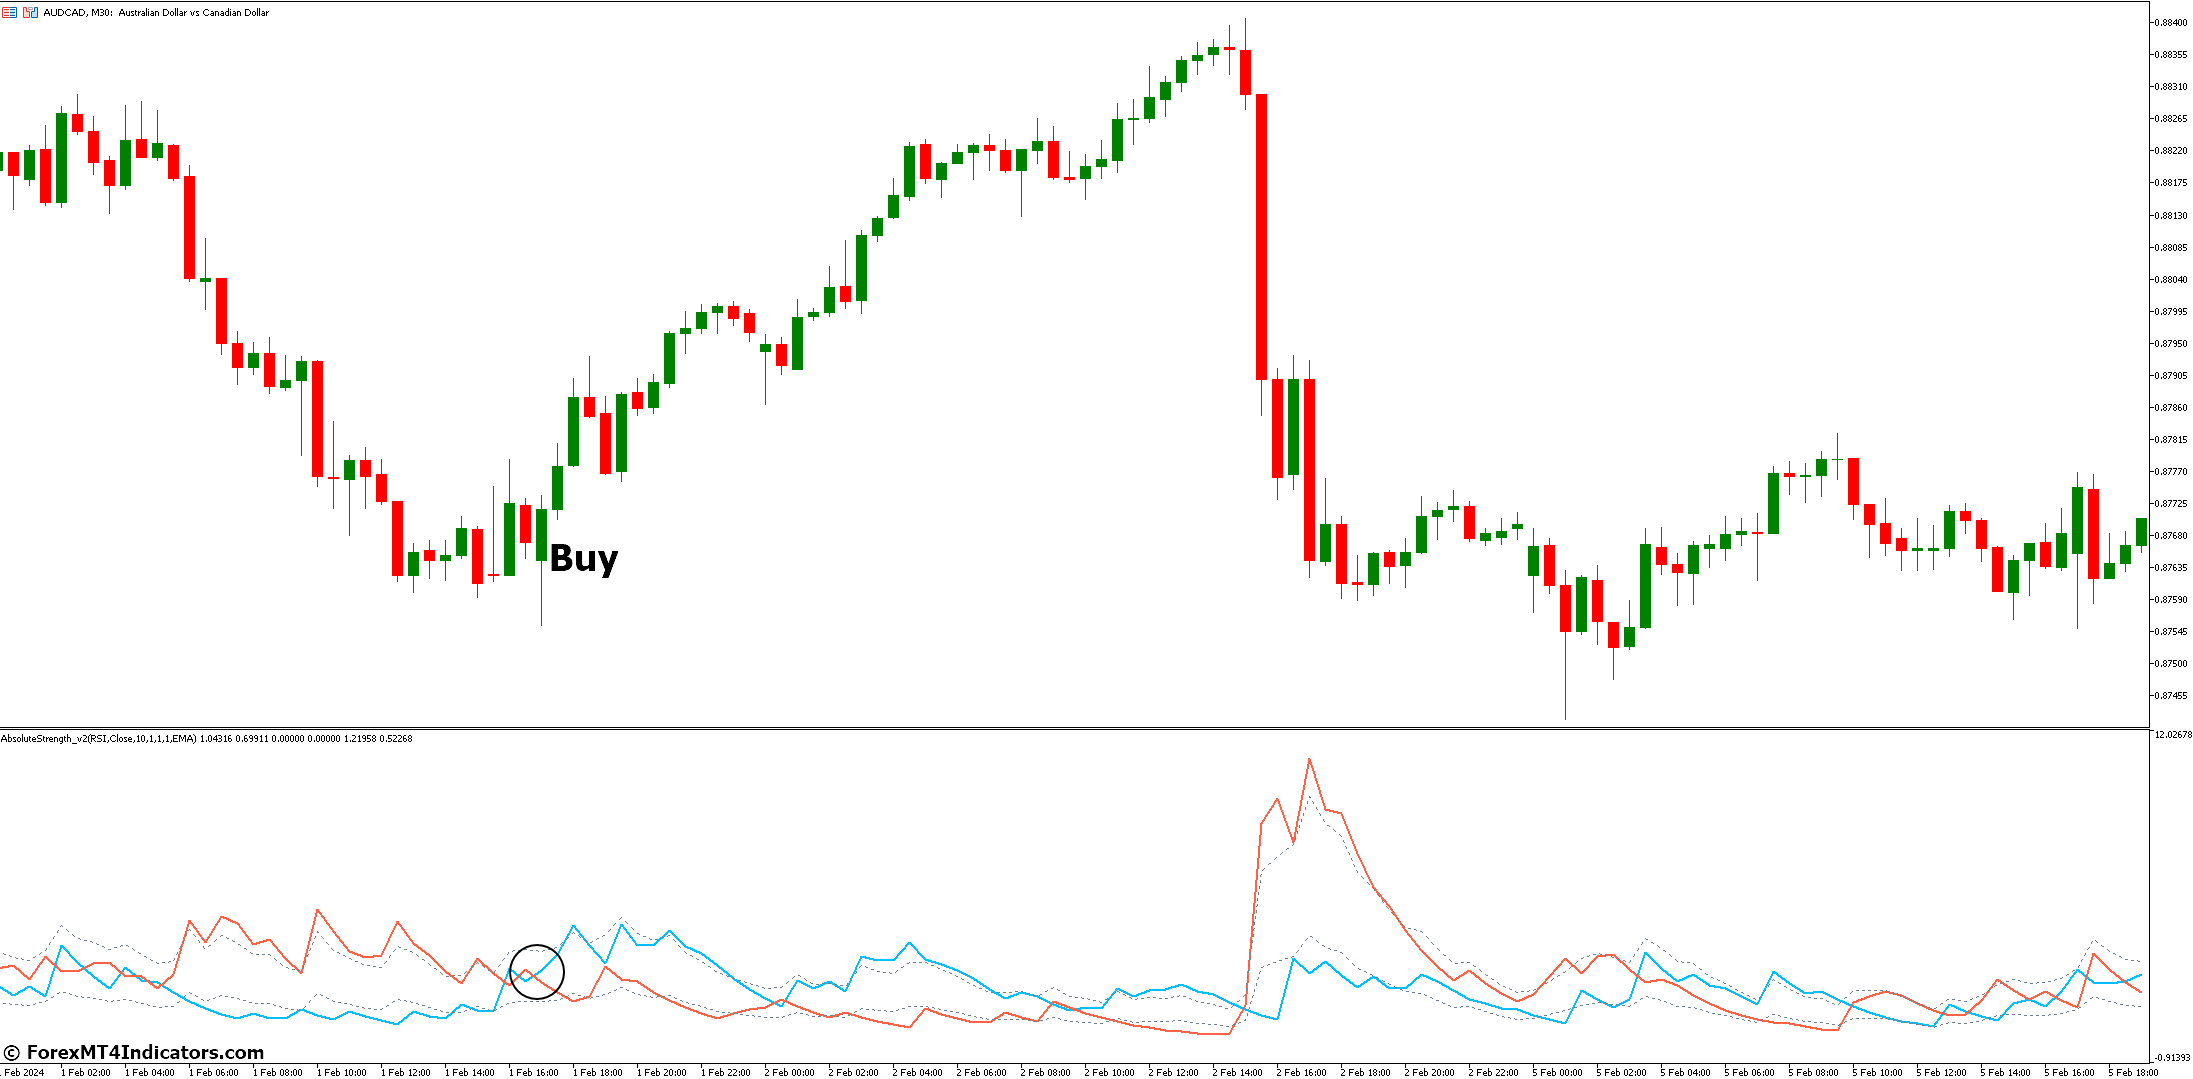 How to Trade with Absolute Strength Market Indicator - Buy Entry